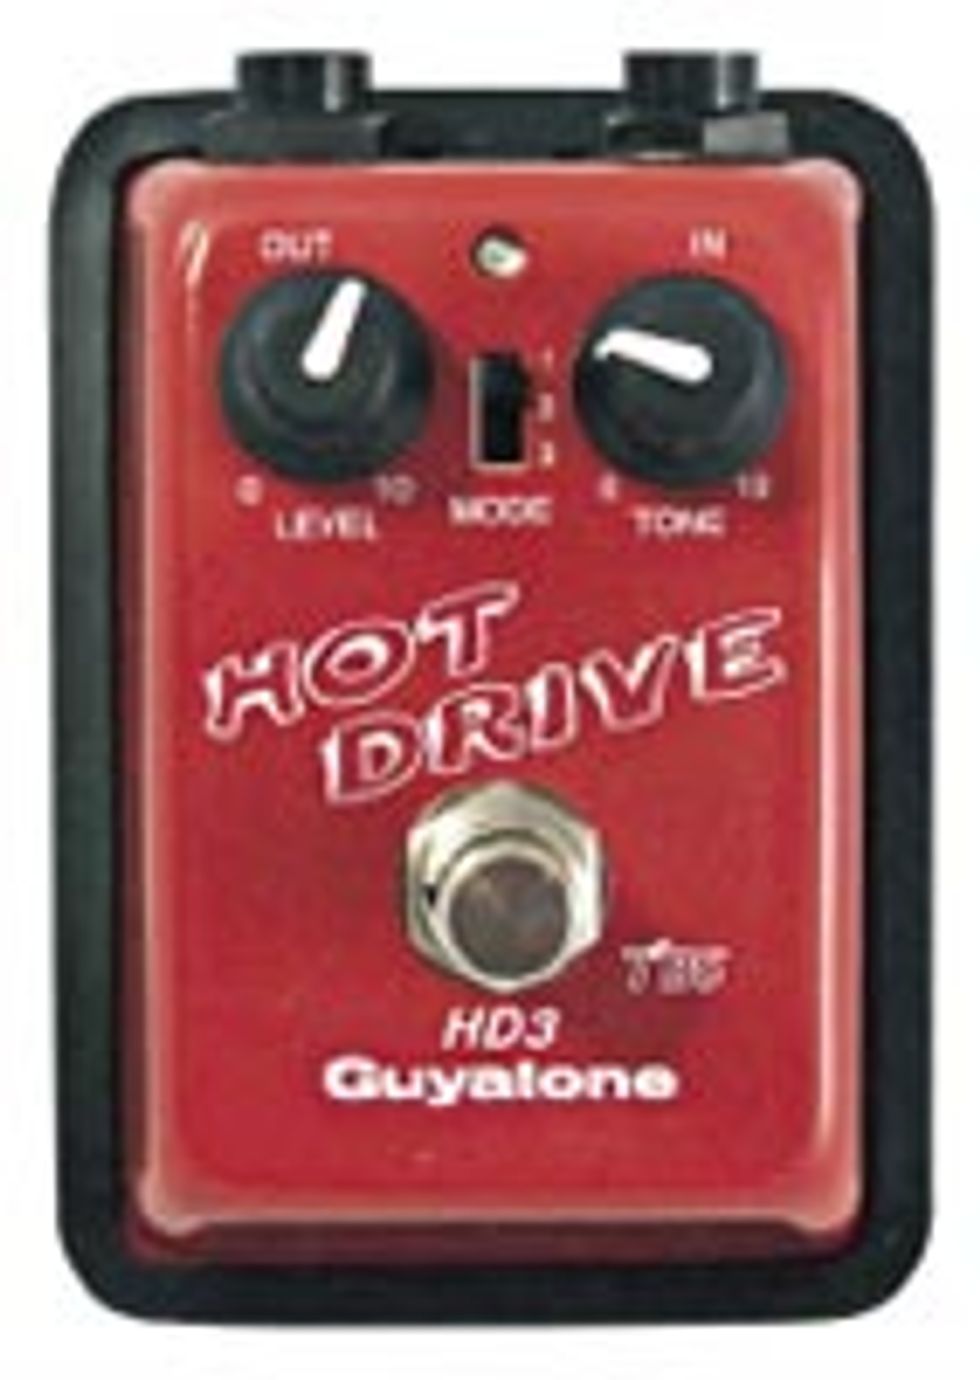 Guyatone Micro Effects Series Pedals